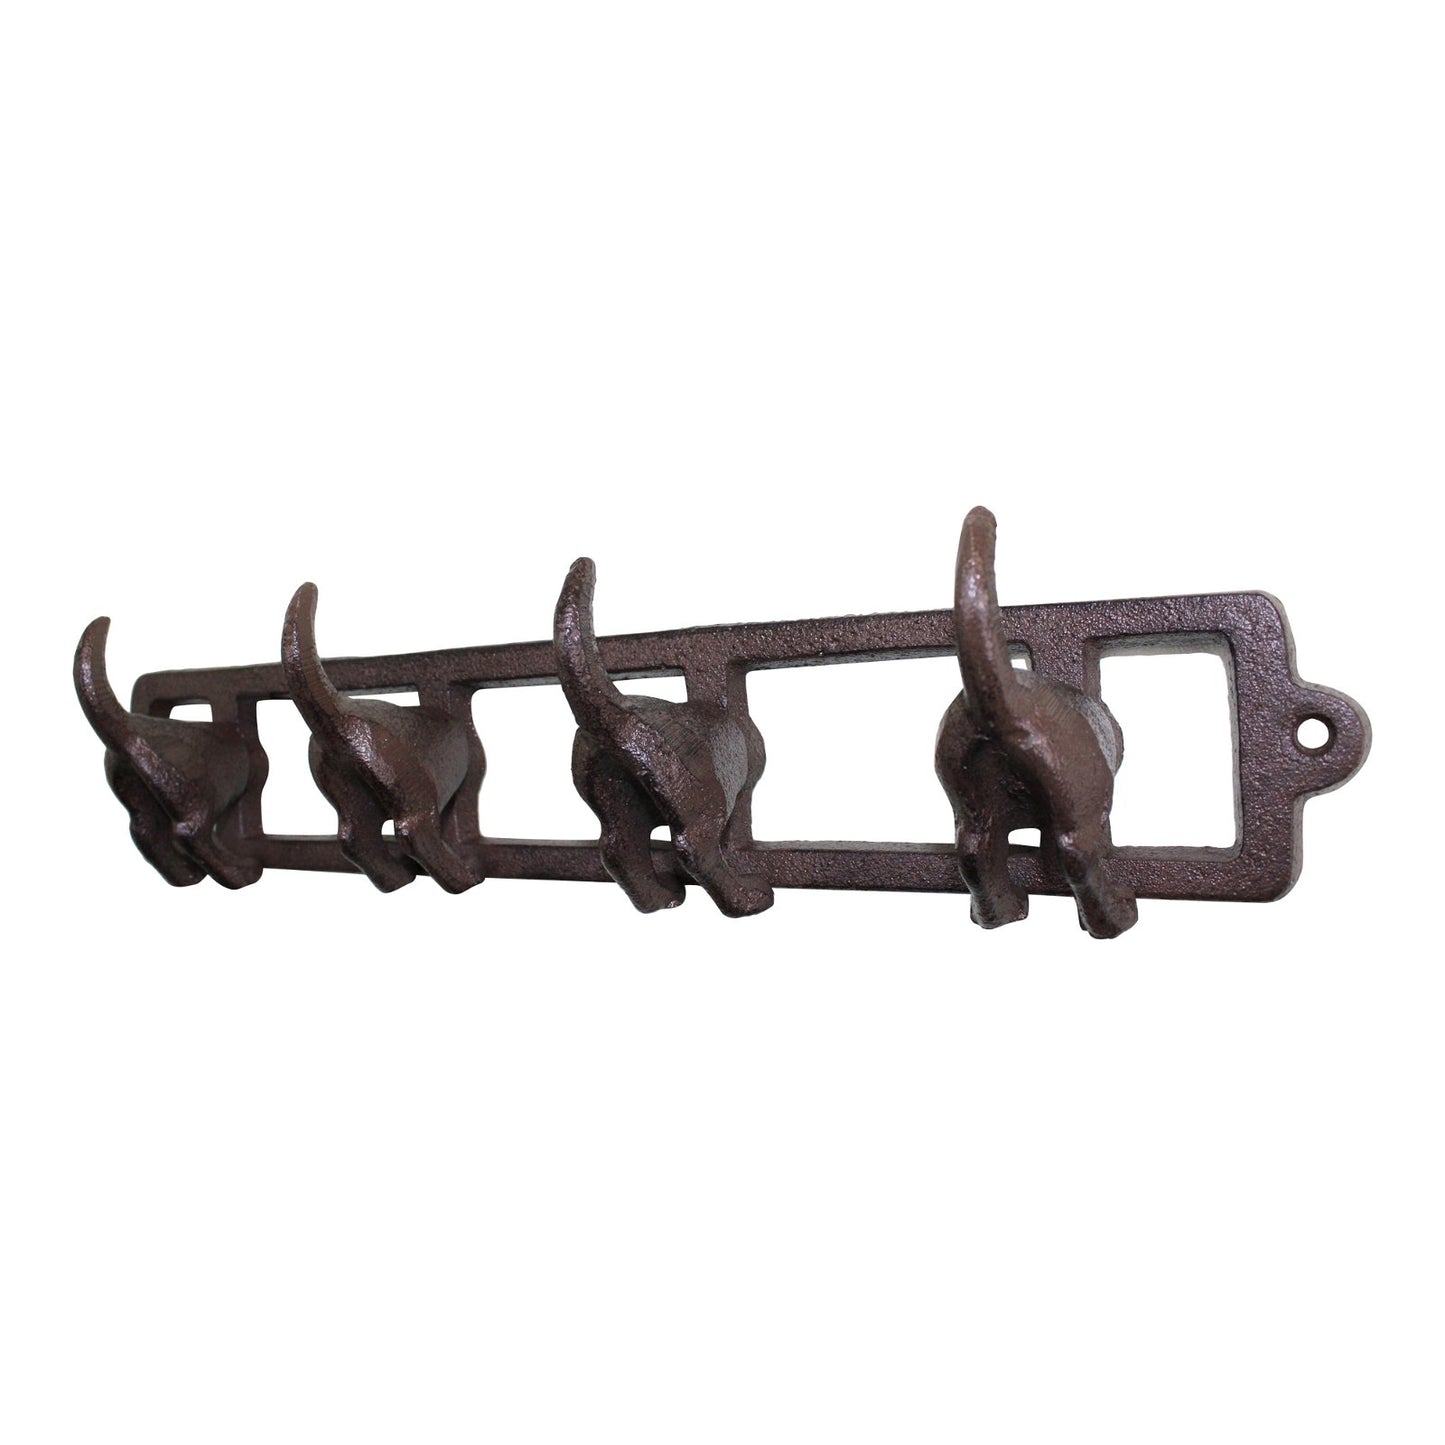 Rustic Cast Iron Wall Hooks, Dogs Tail Willow and Wine